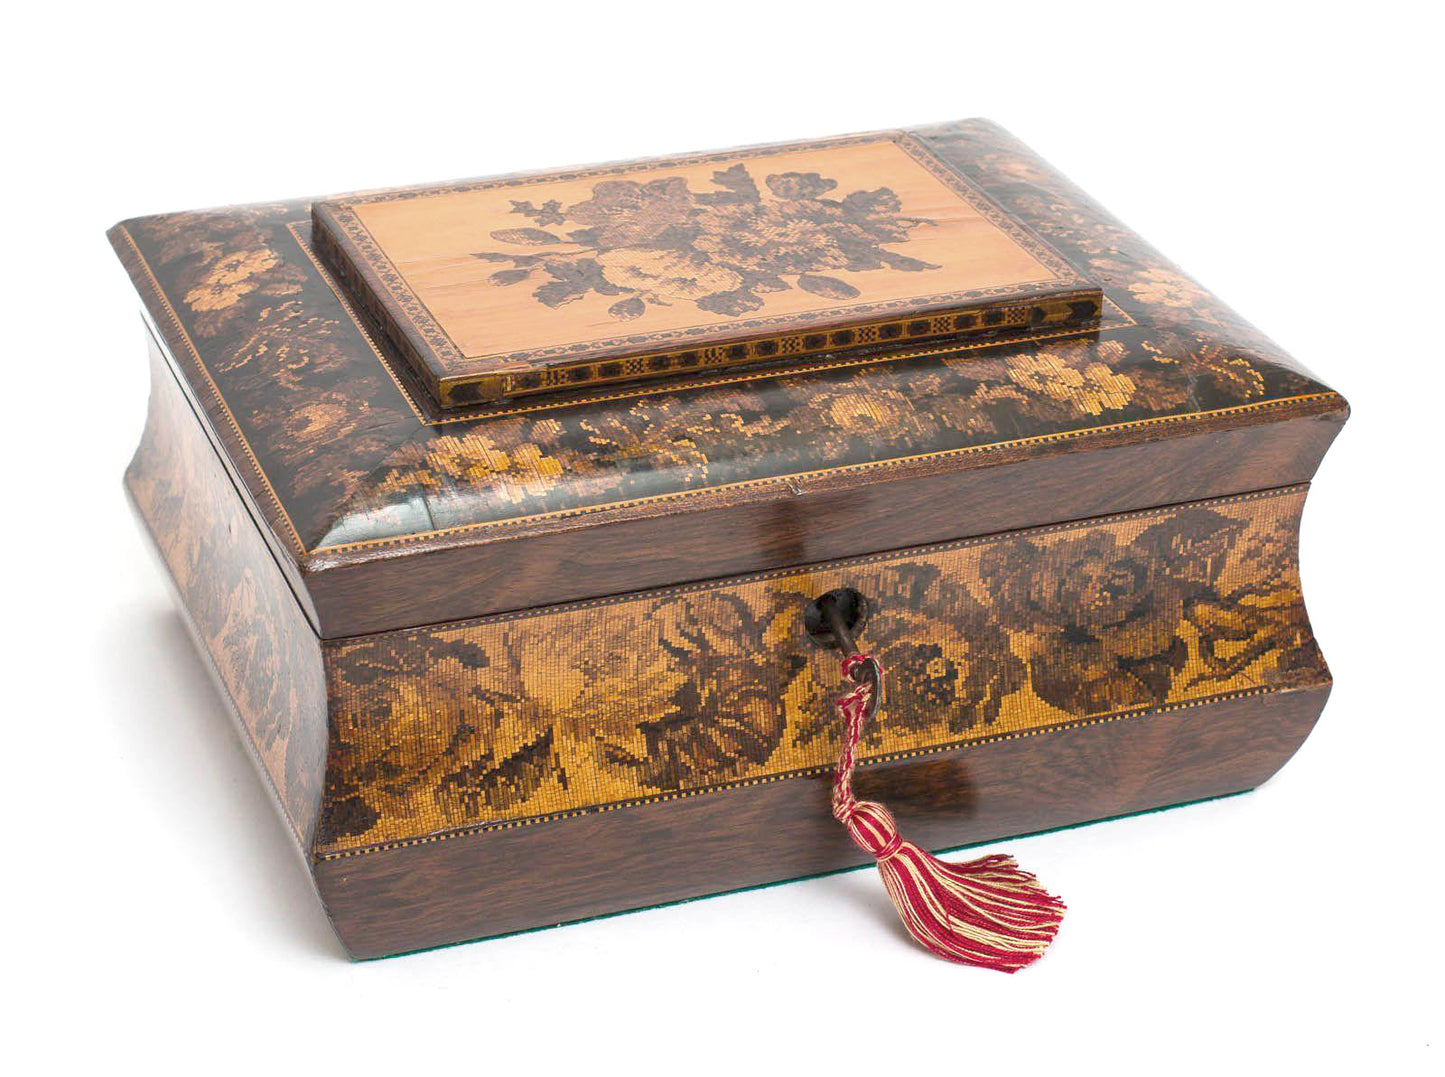 Rare Victorian Antique Tunbridge Ware Wooden Sewing Work Box Inlaid with Roses - Code (8202)